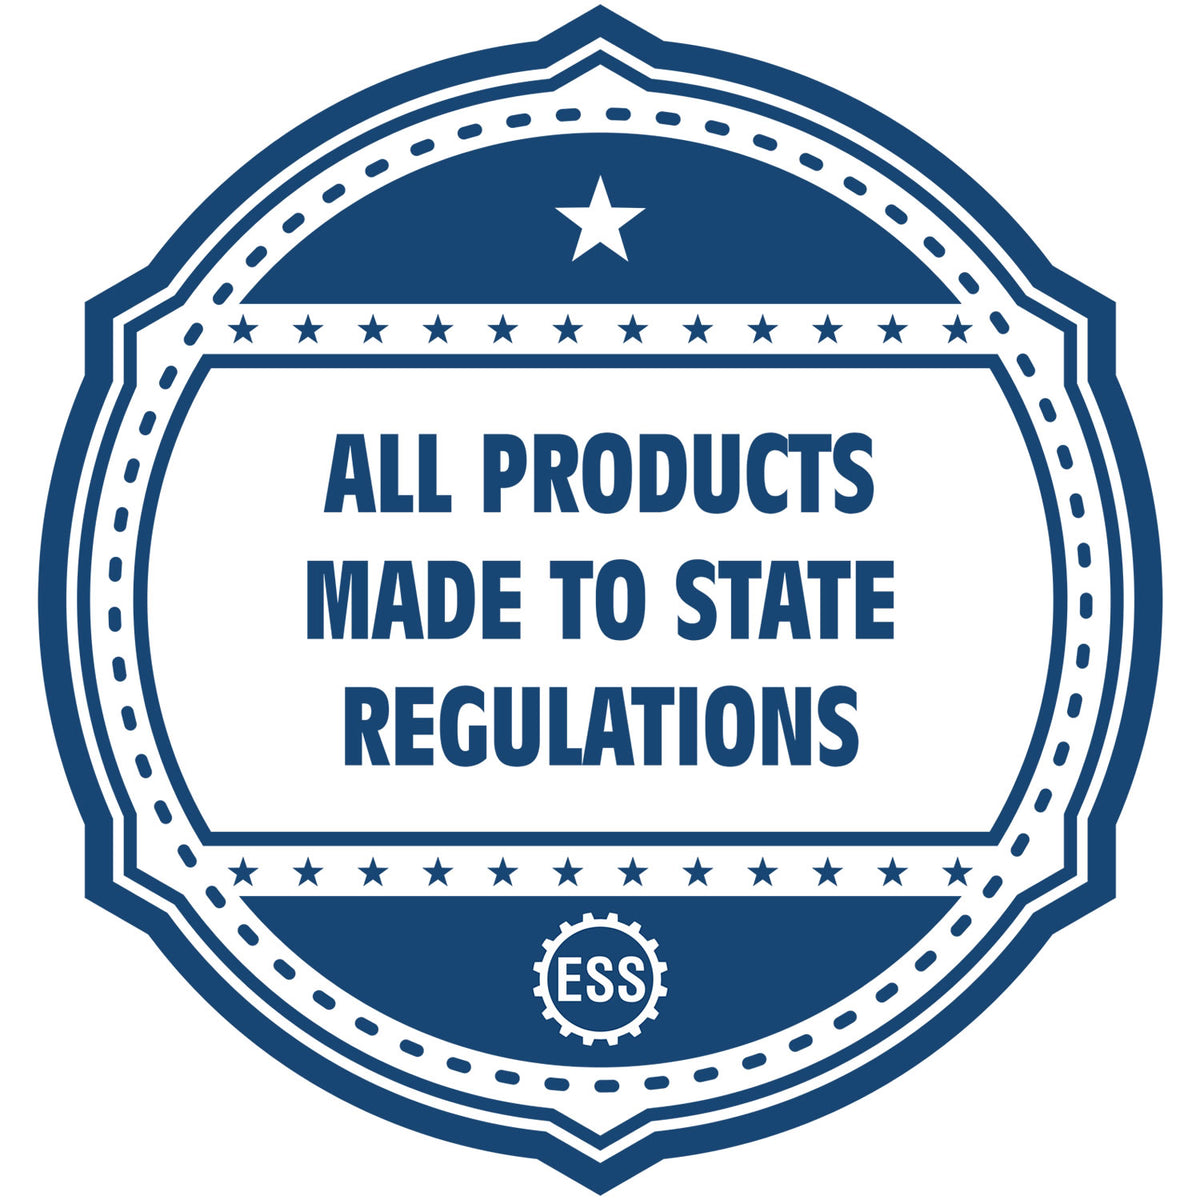 A blue icon or badge for the Gift Kansas Architect Seal showing that this product is made in compliance with state regulations.